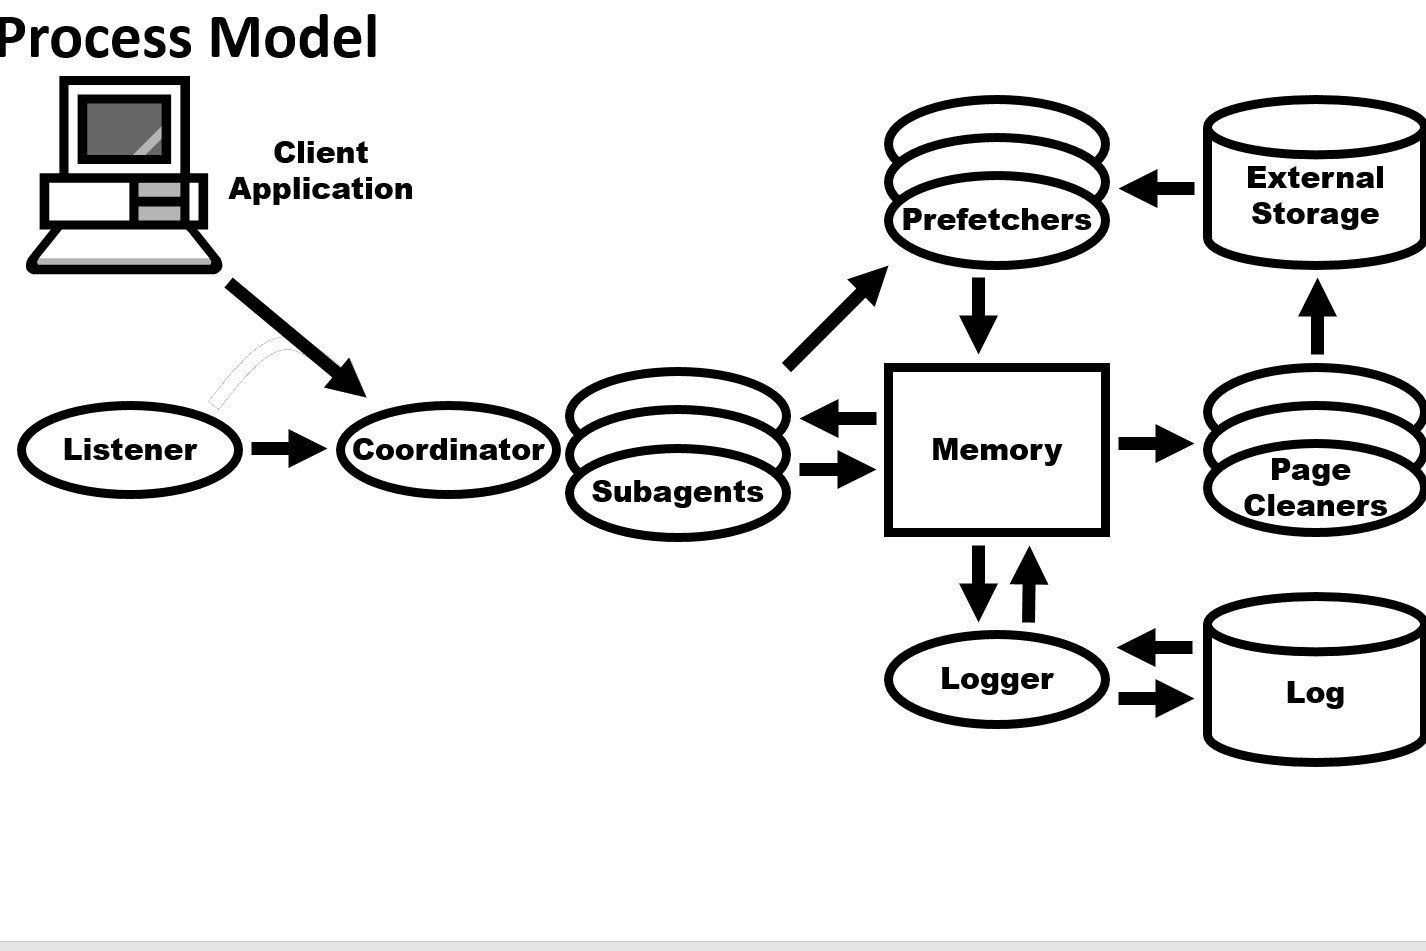 A diagram of the Db2 LUW Process Model showing major components that can help in database performance tuning efforts.